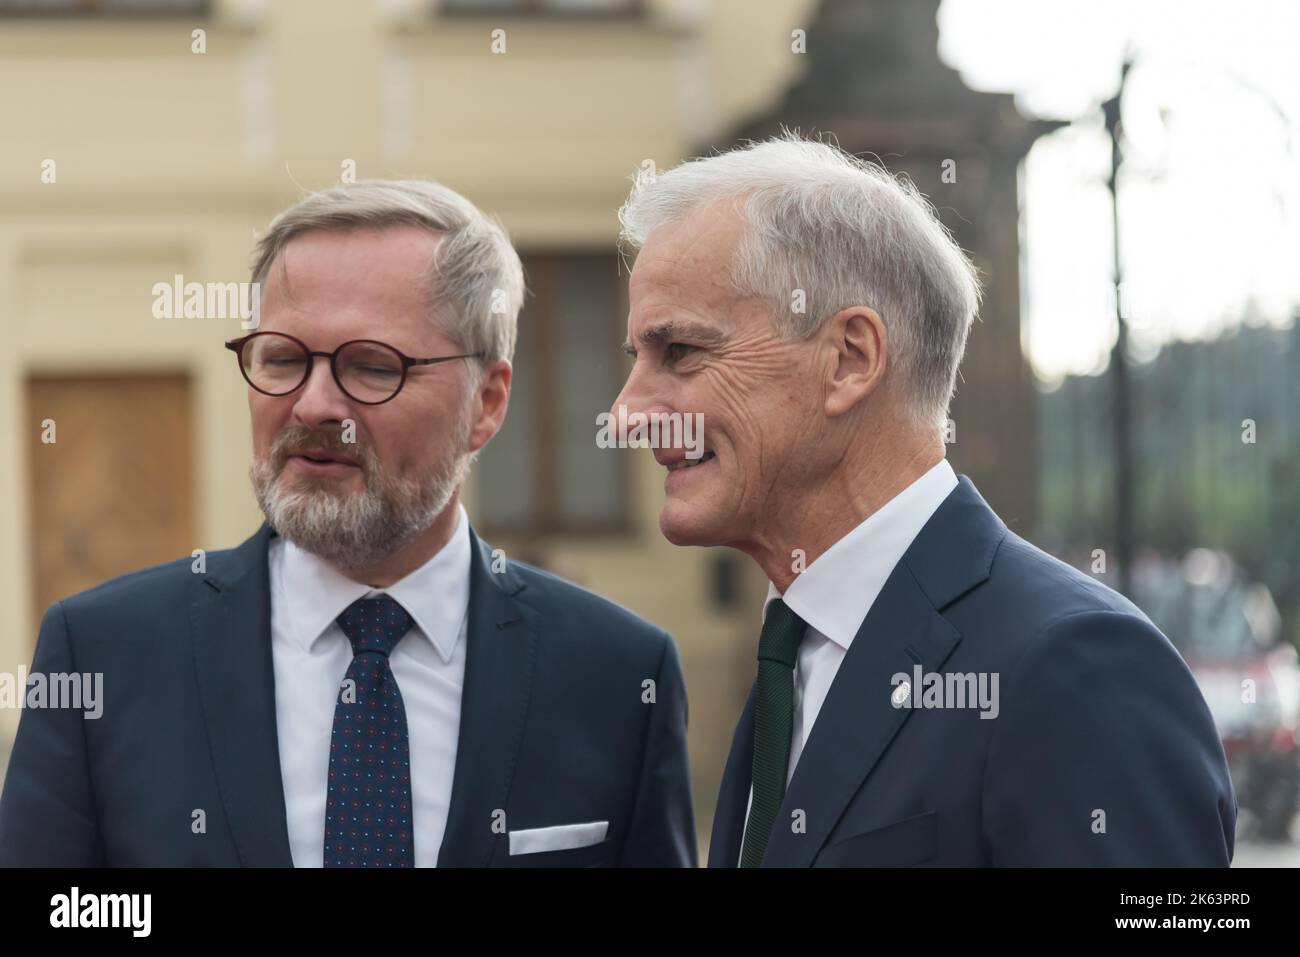 Czech Prime minister Petr Fiala (L) and Norway's Prime Minister Jonas Gahr Store (R) seen before the European Political Community summit in Prague. This is the first ever meeting of a wider format of member states of European Union and other European countries across the continent. Stock Photo